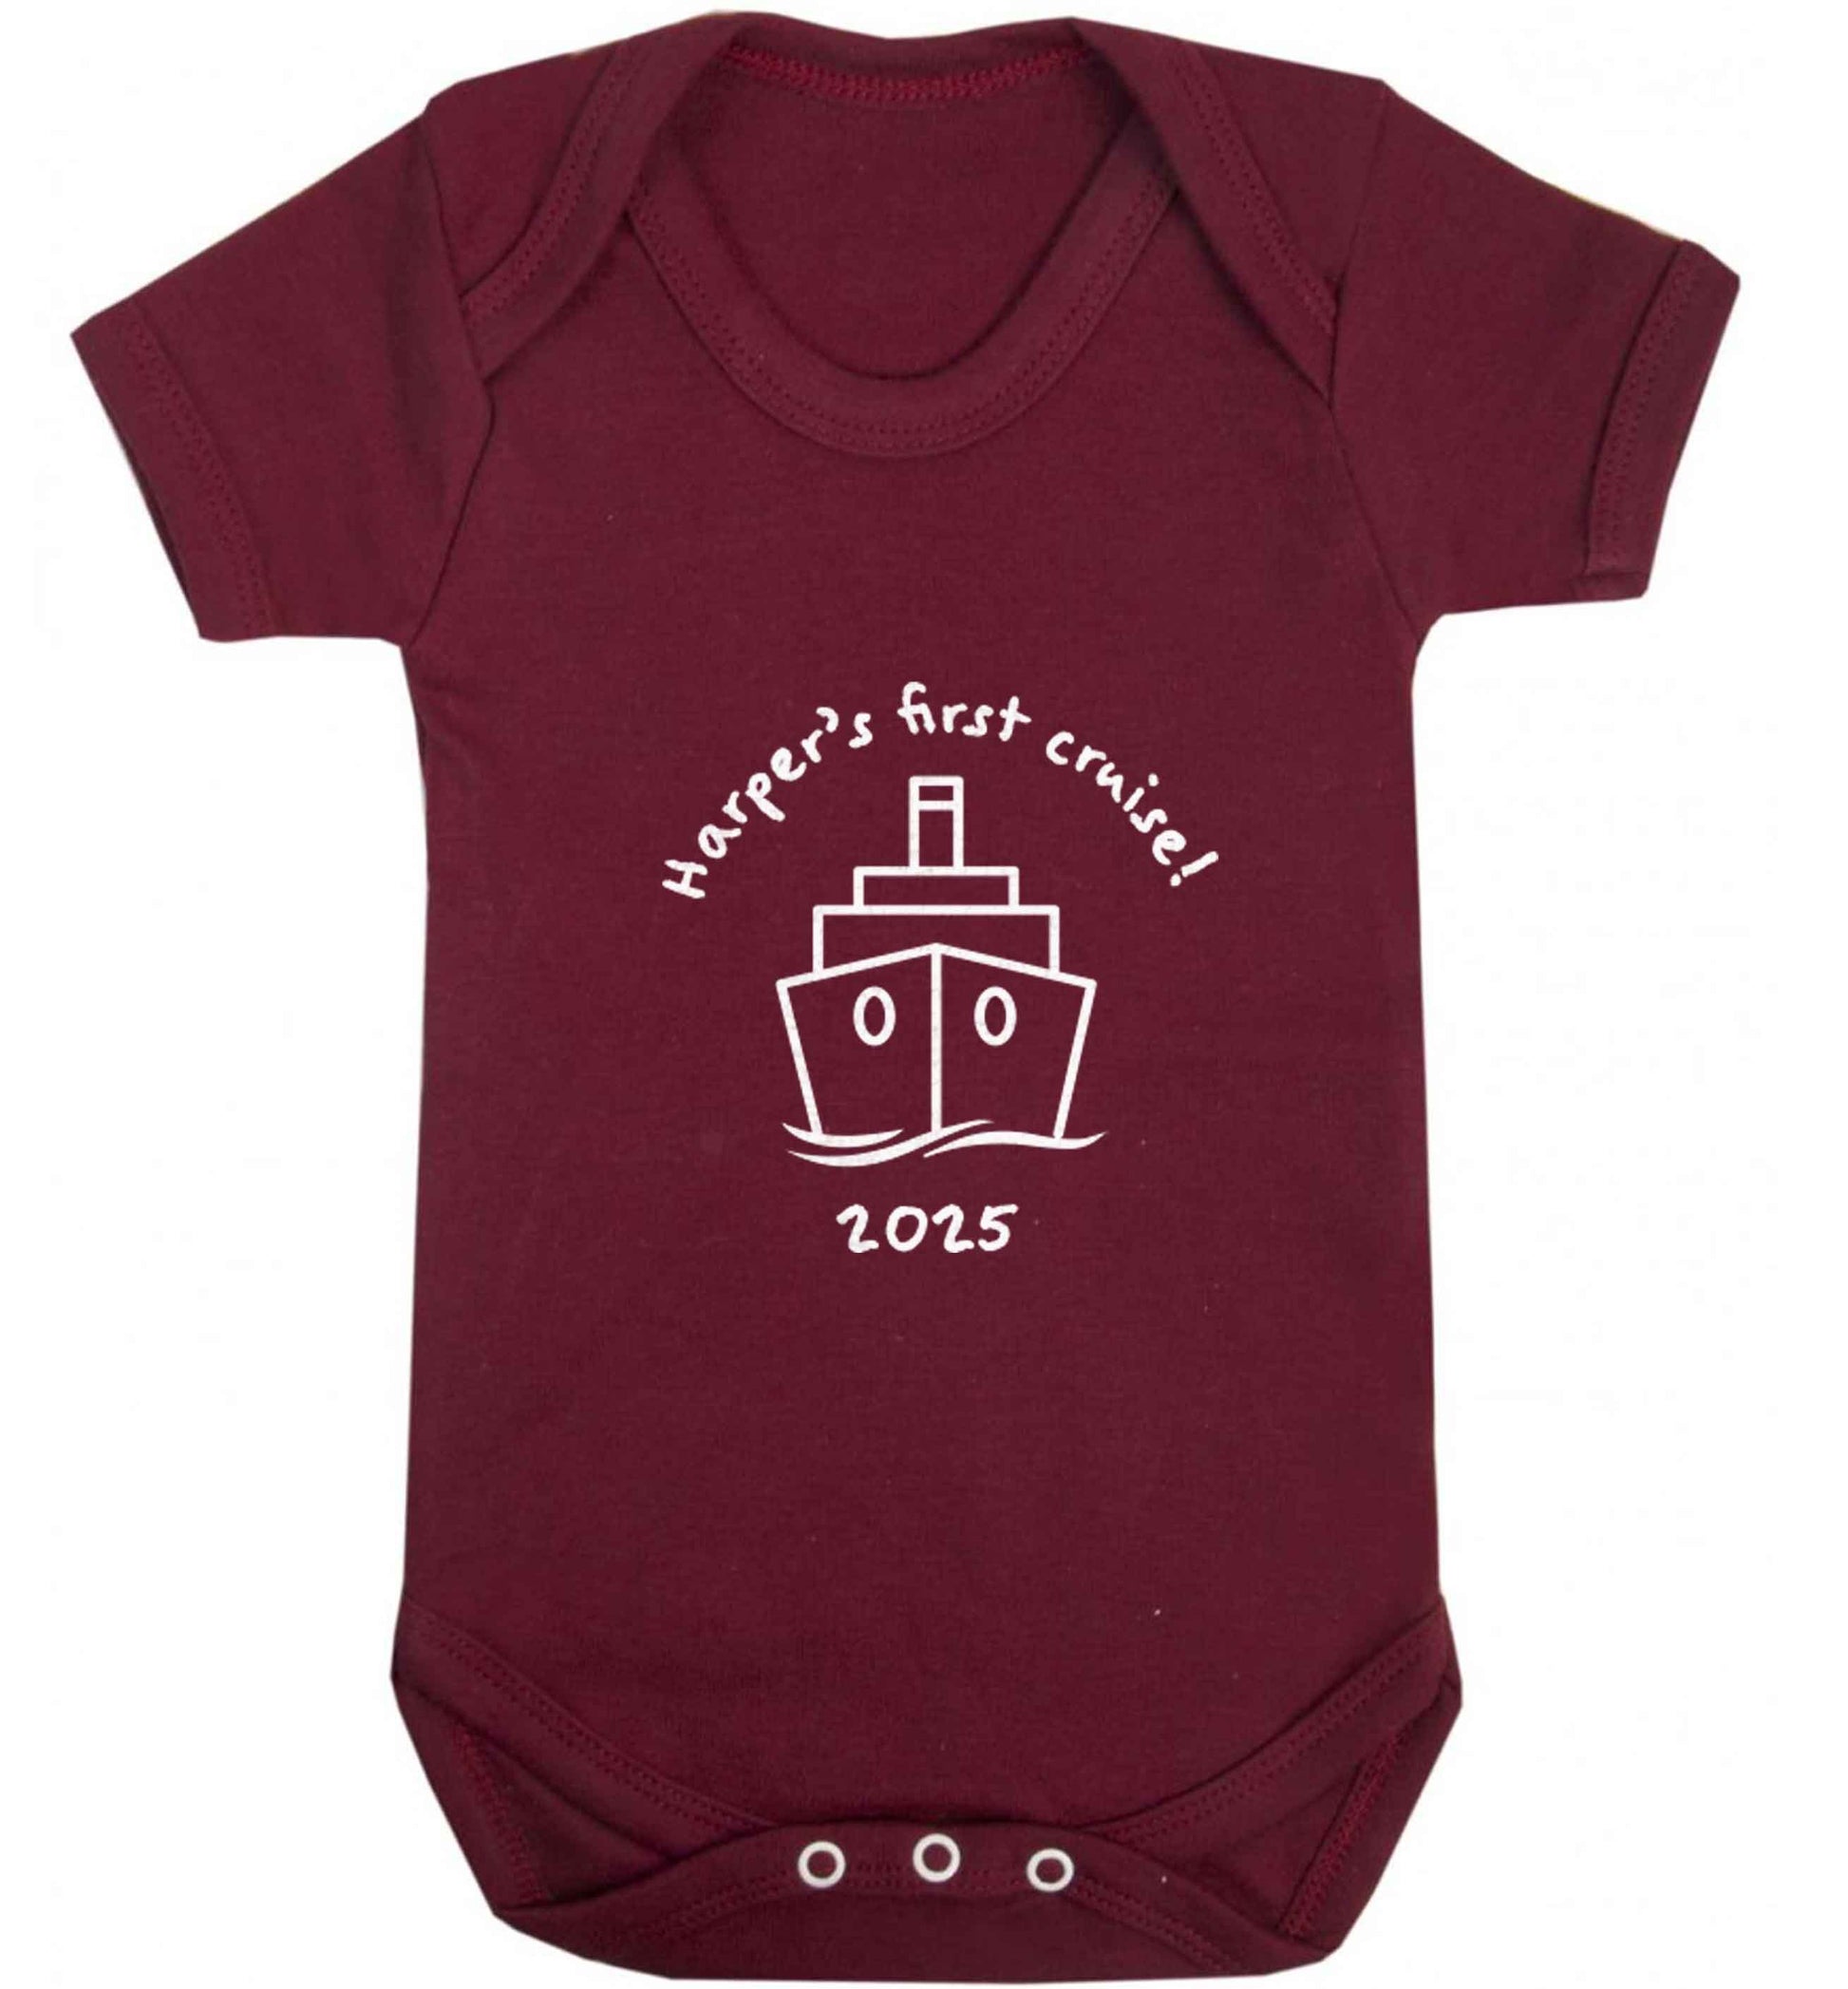 Personalised first cruise baby vest maroon 18-24 months